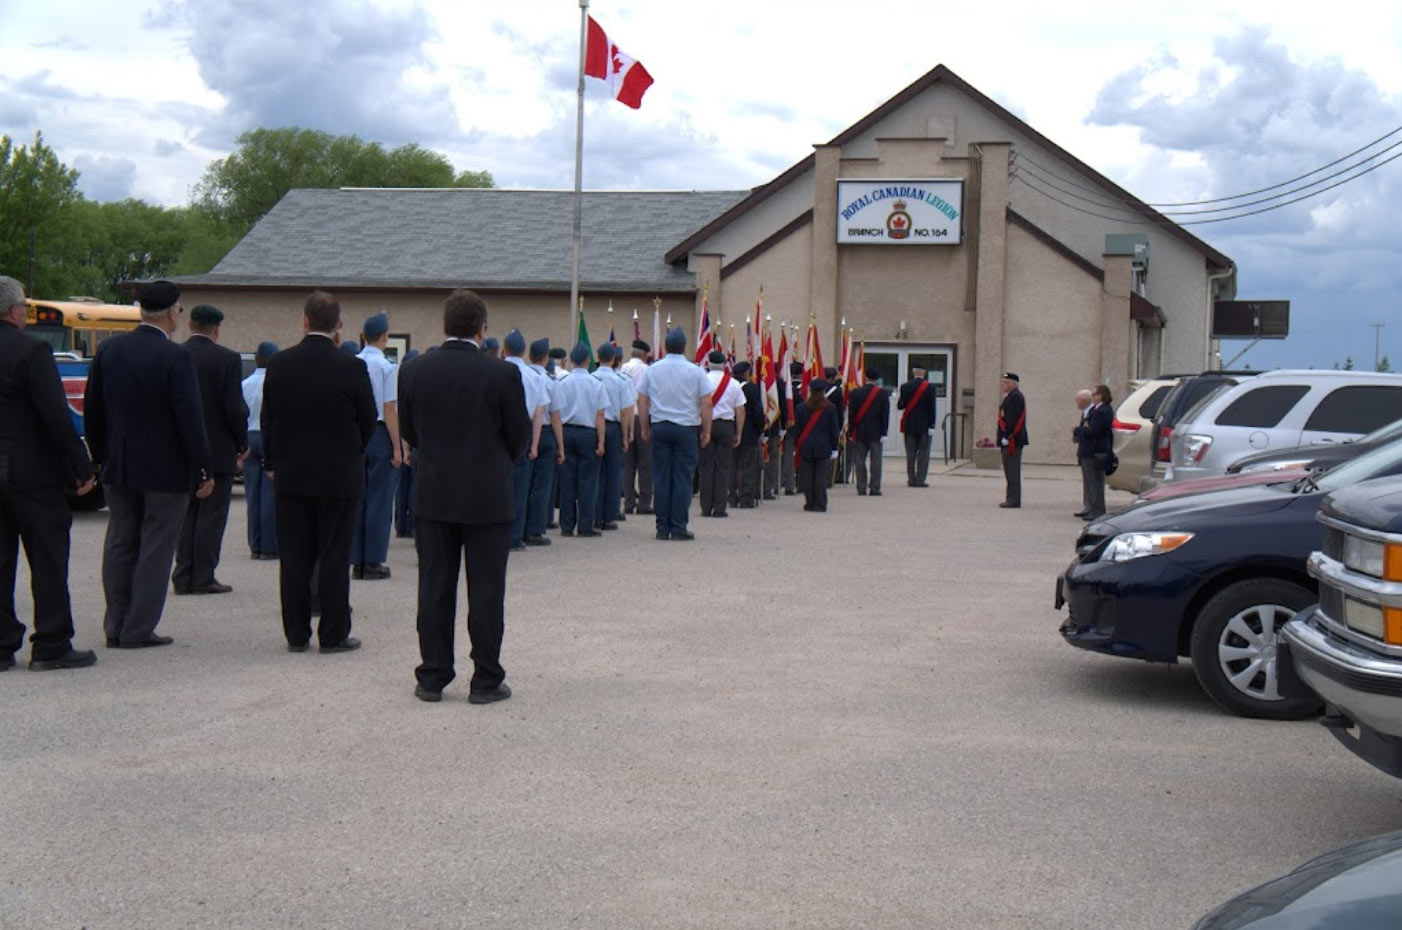 Photo of dozens of people dressed in uniform entering the Lac du Bonnet Legion in an orderly fashion.